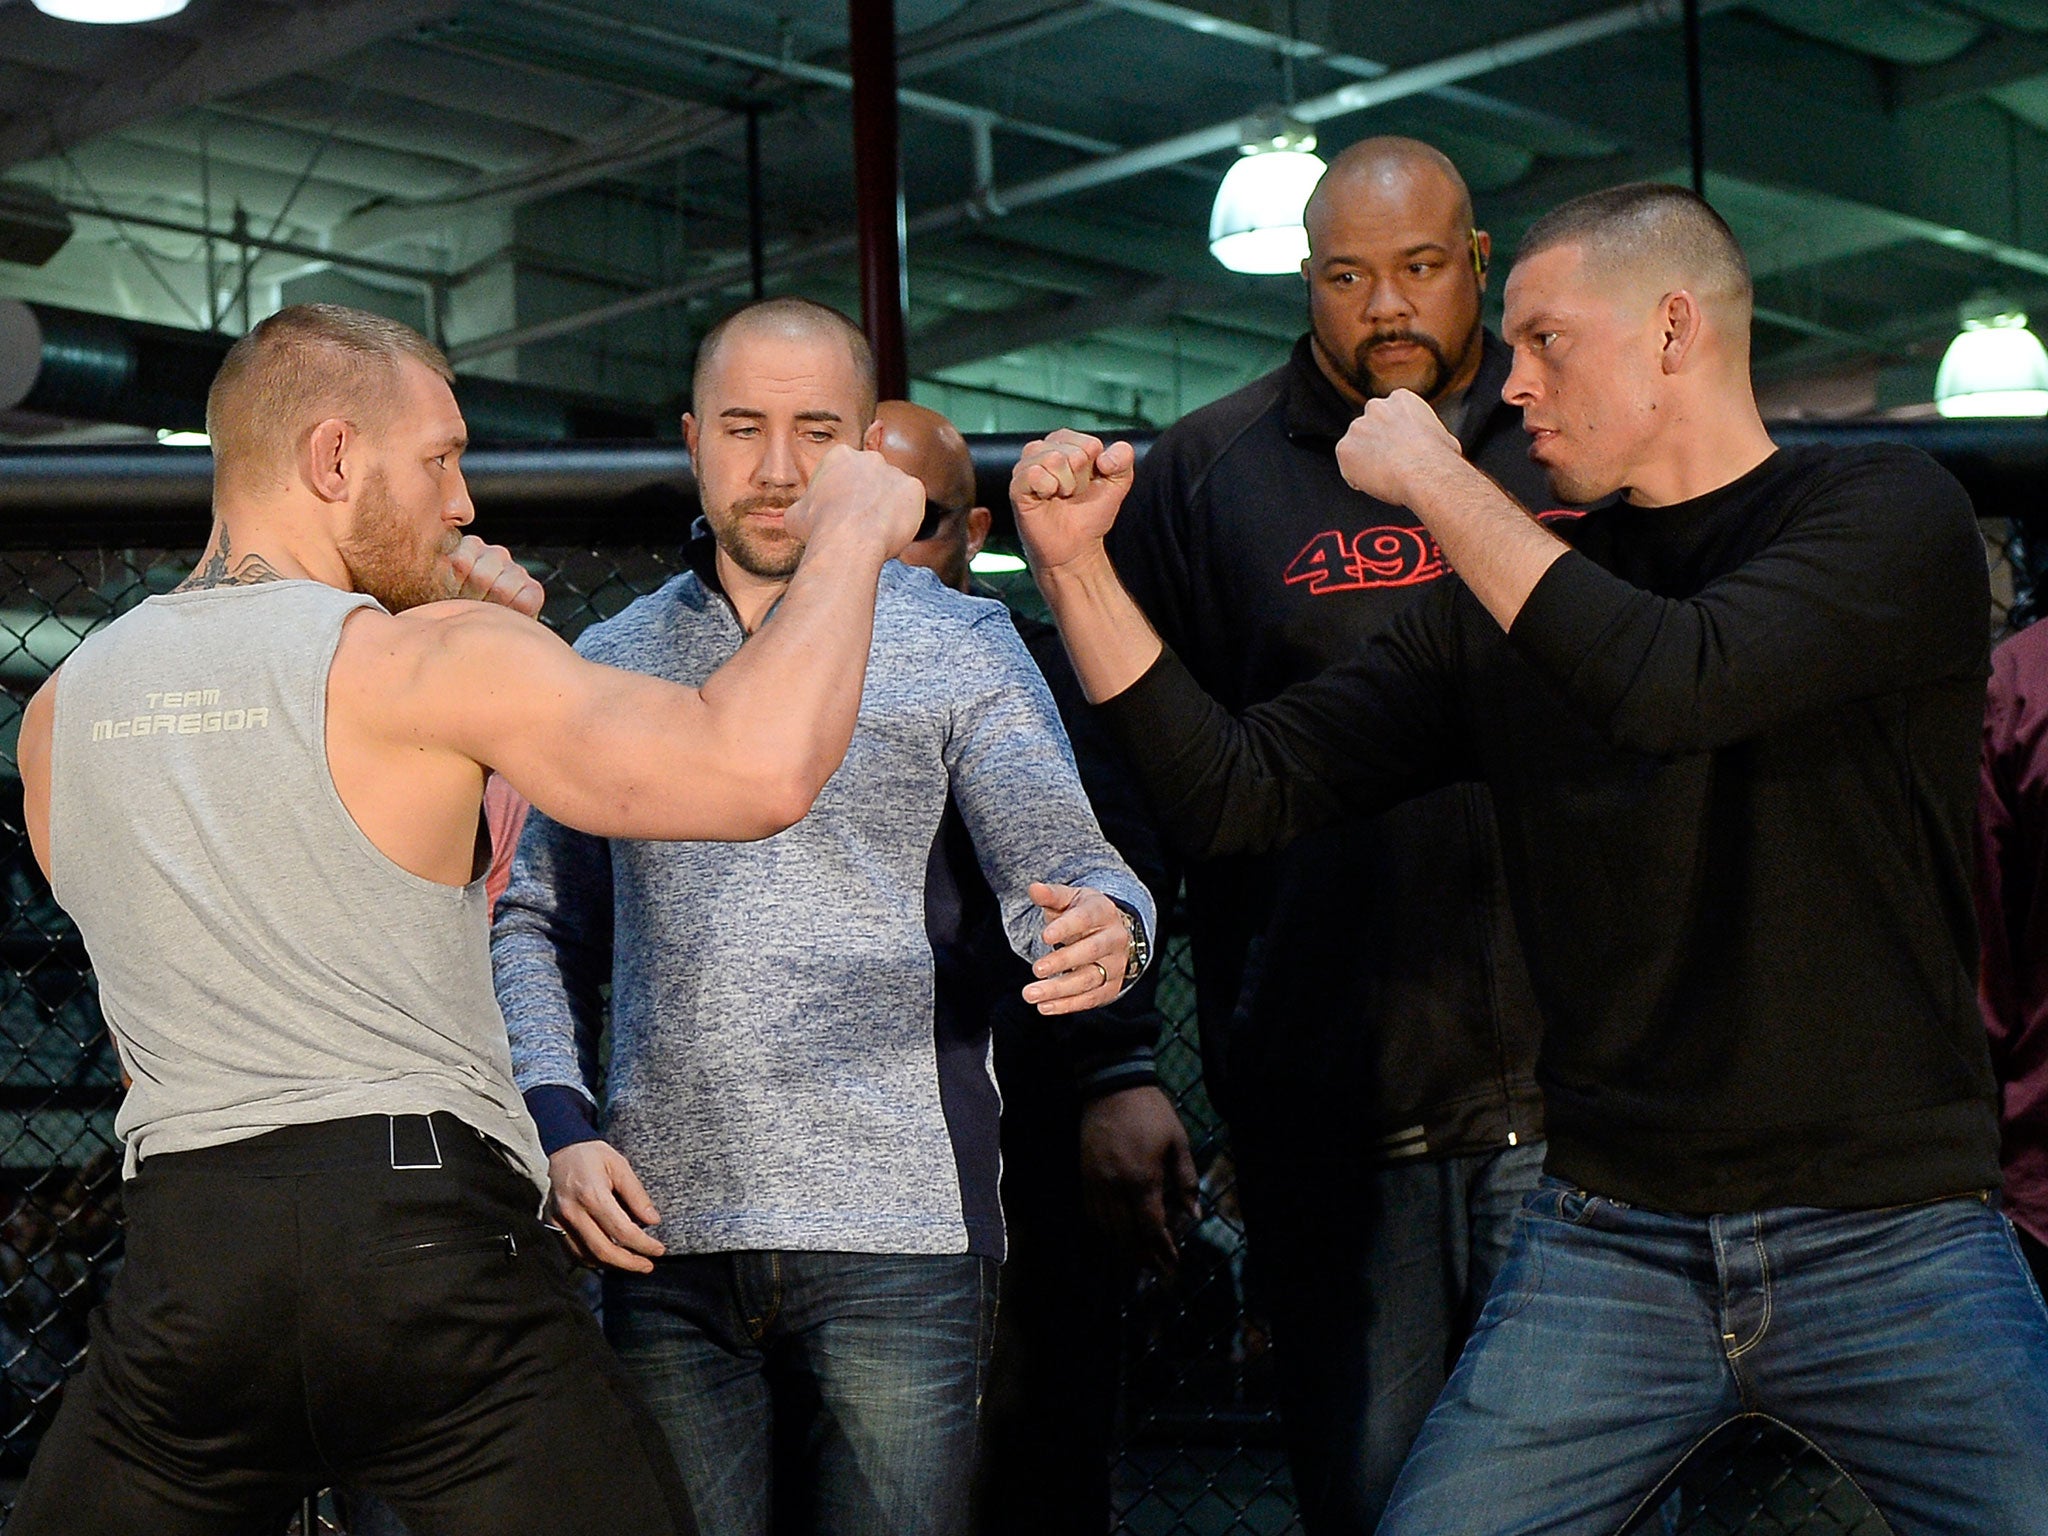 Conor McGregor and Nate Diaz square off ahead of UFC 196